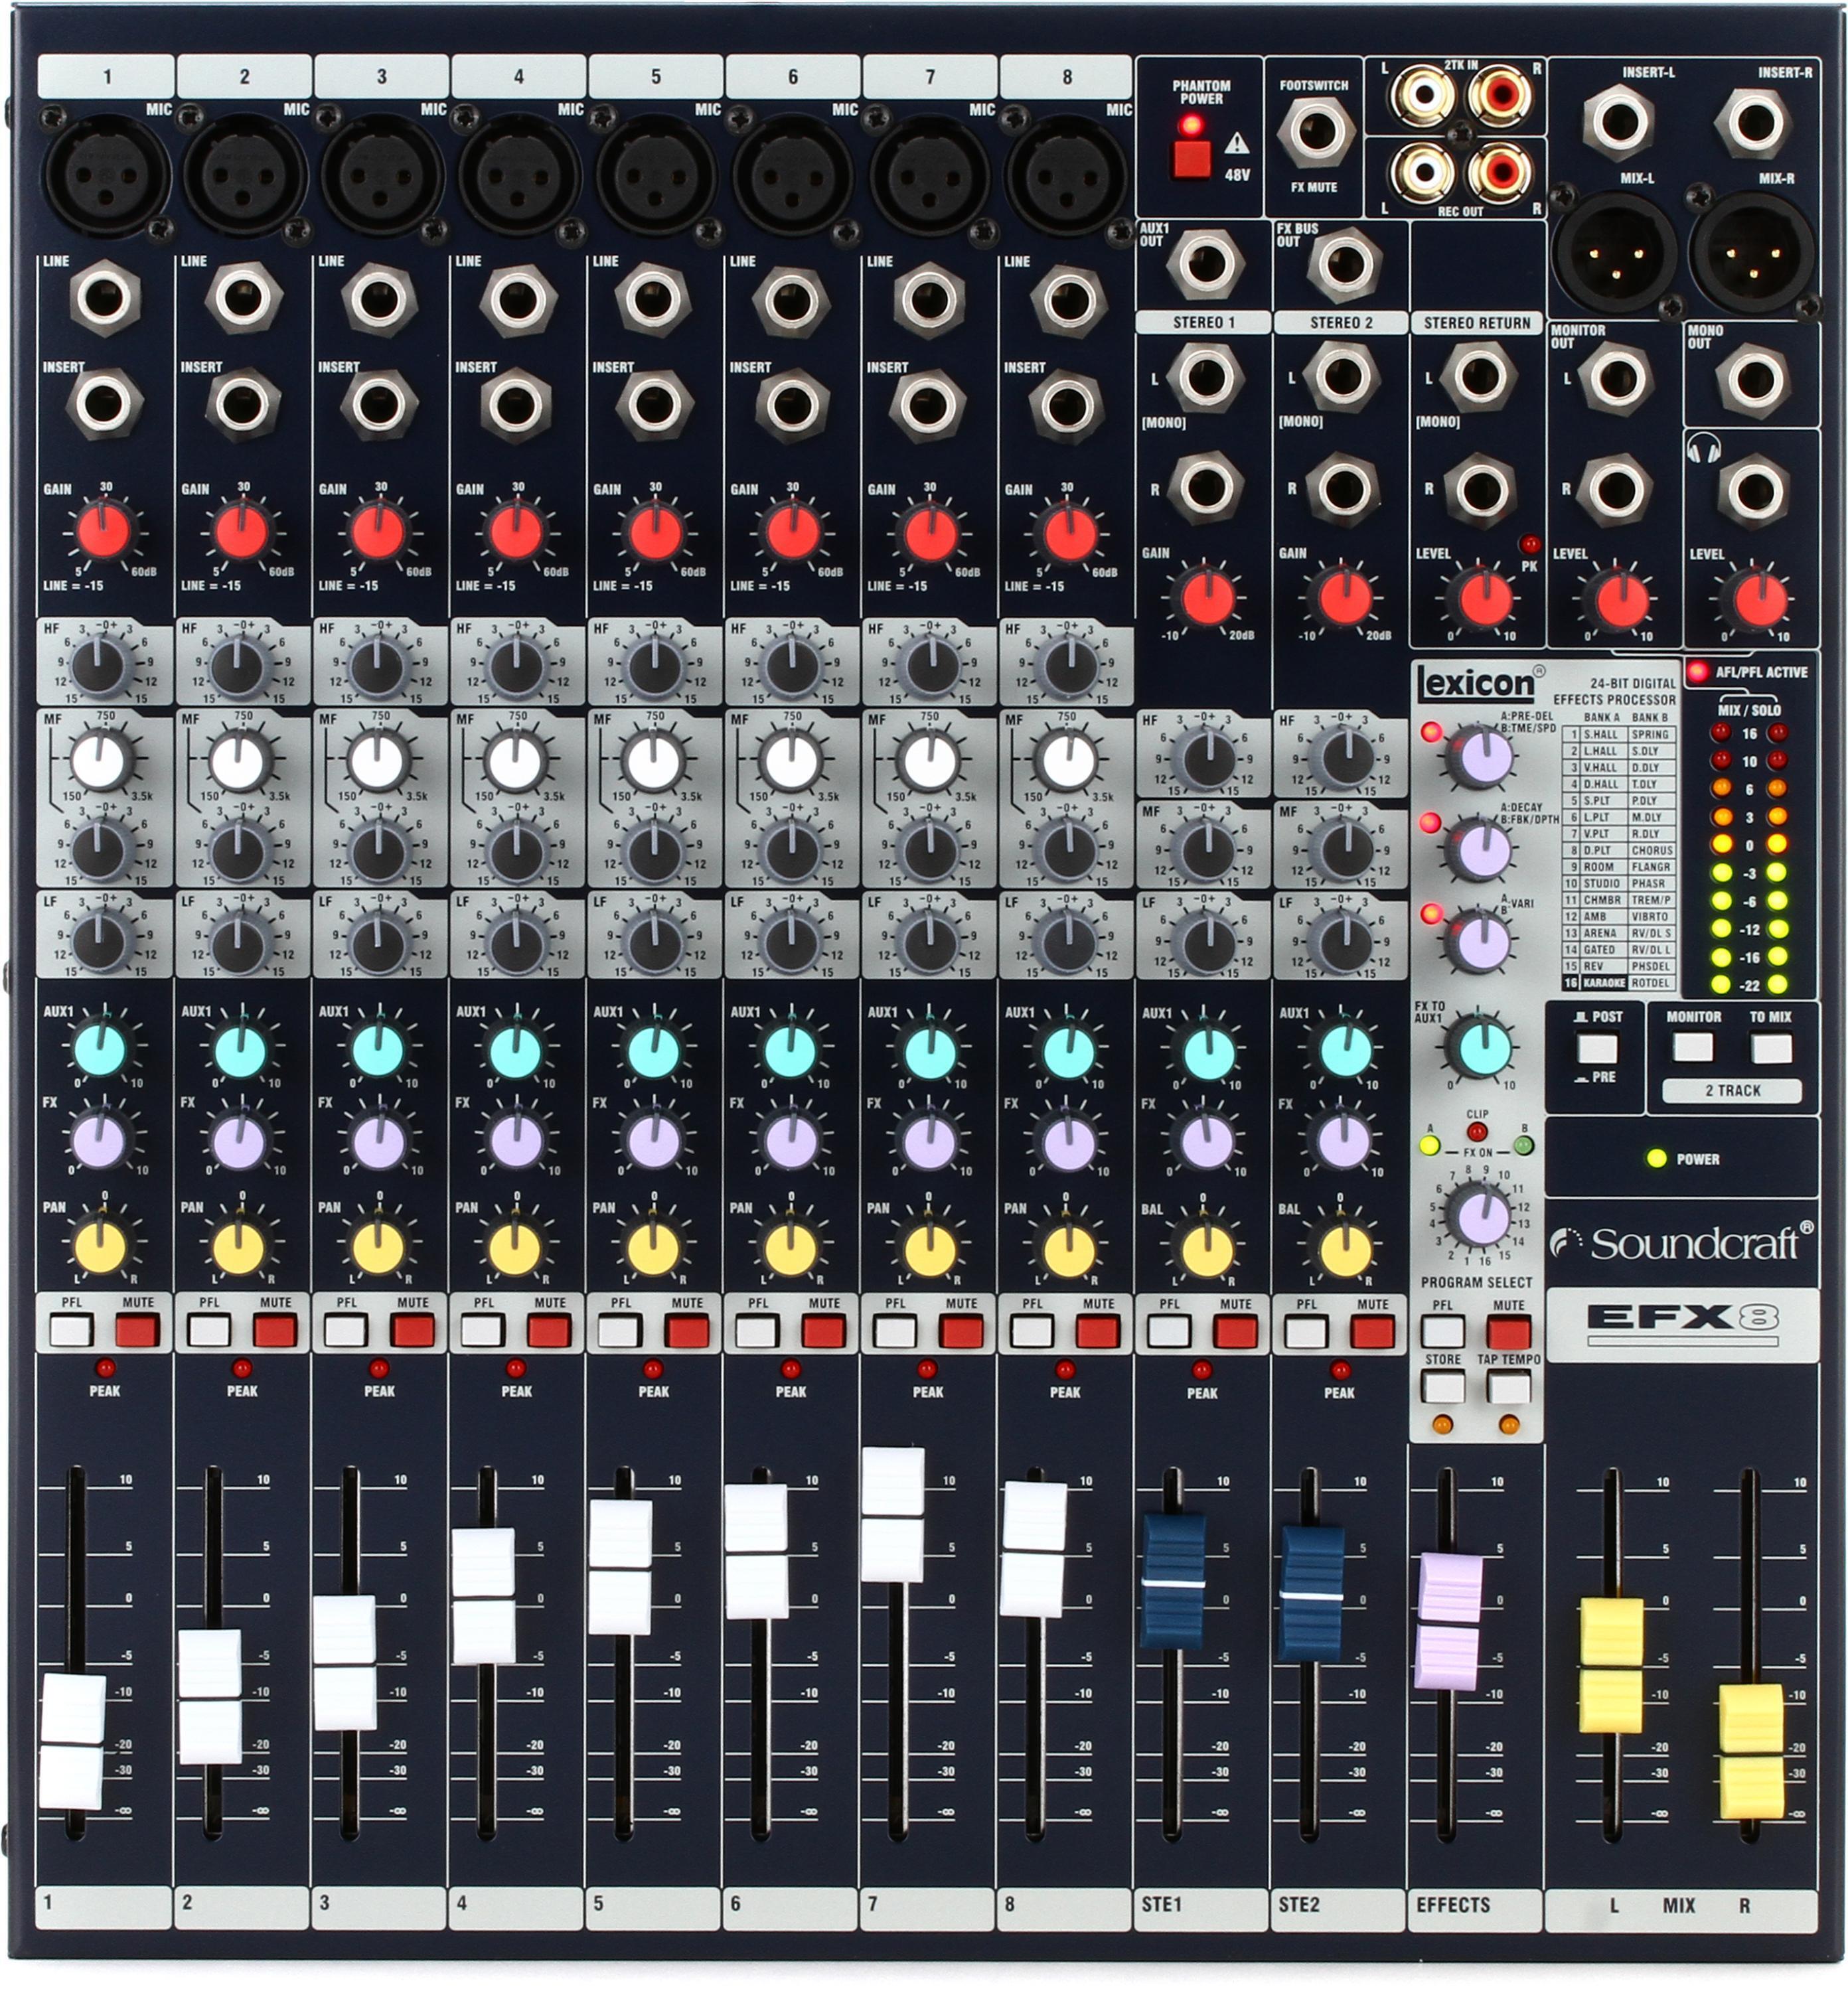 Bundled Item: Soundcraft EFX8 8-channel Mixer with Effects